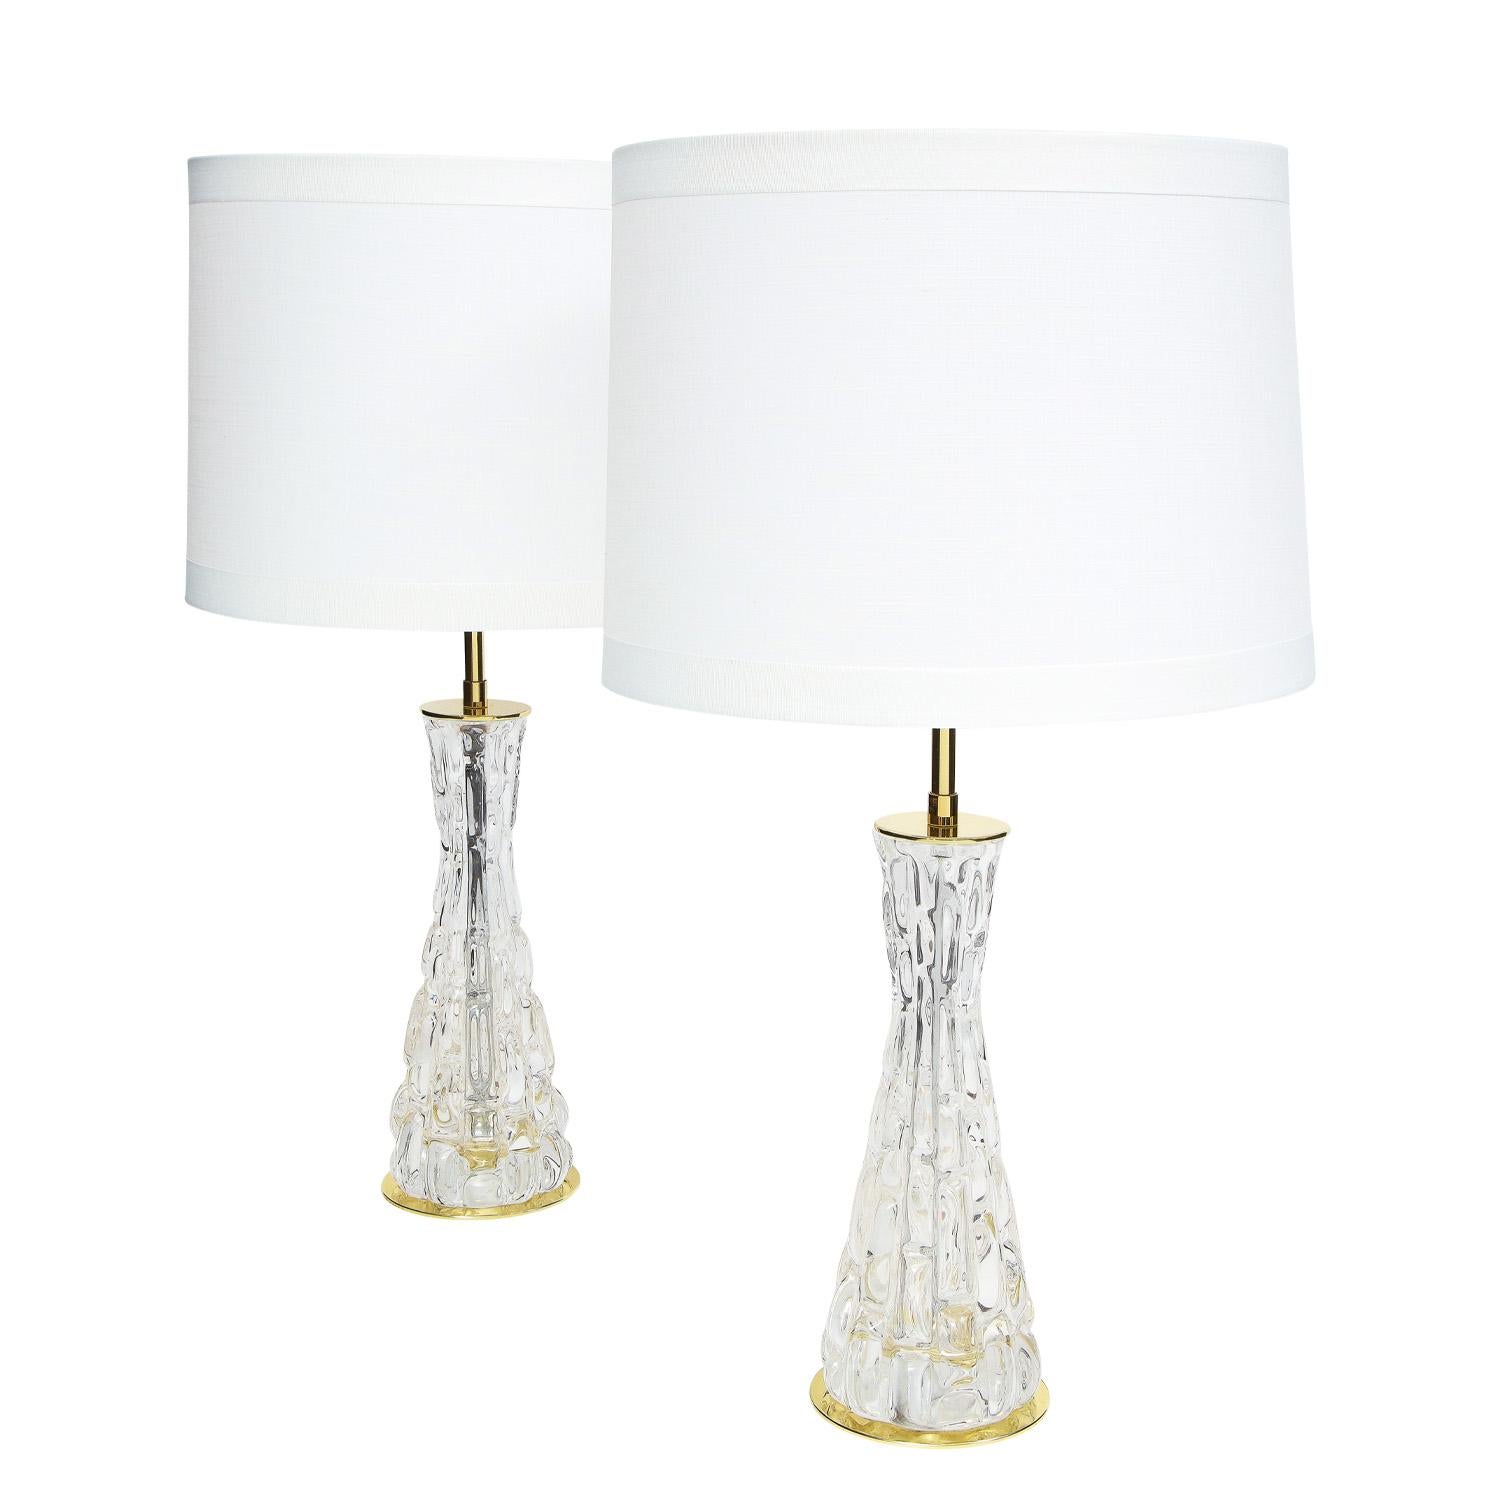 Mid-Century Modern Orrefors Pair of Exquisite Textured Glass Table Lamps 1957